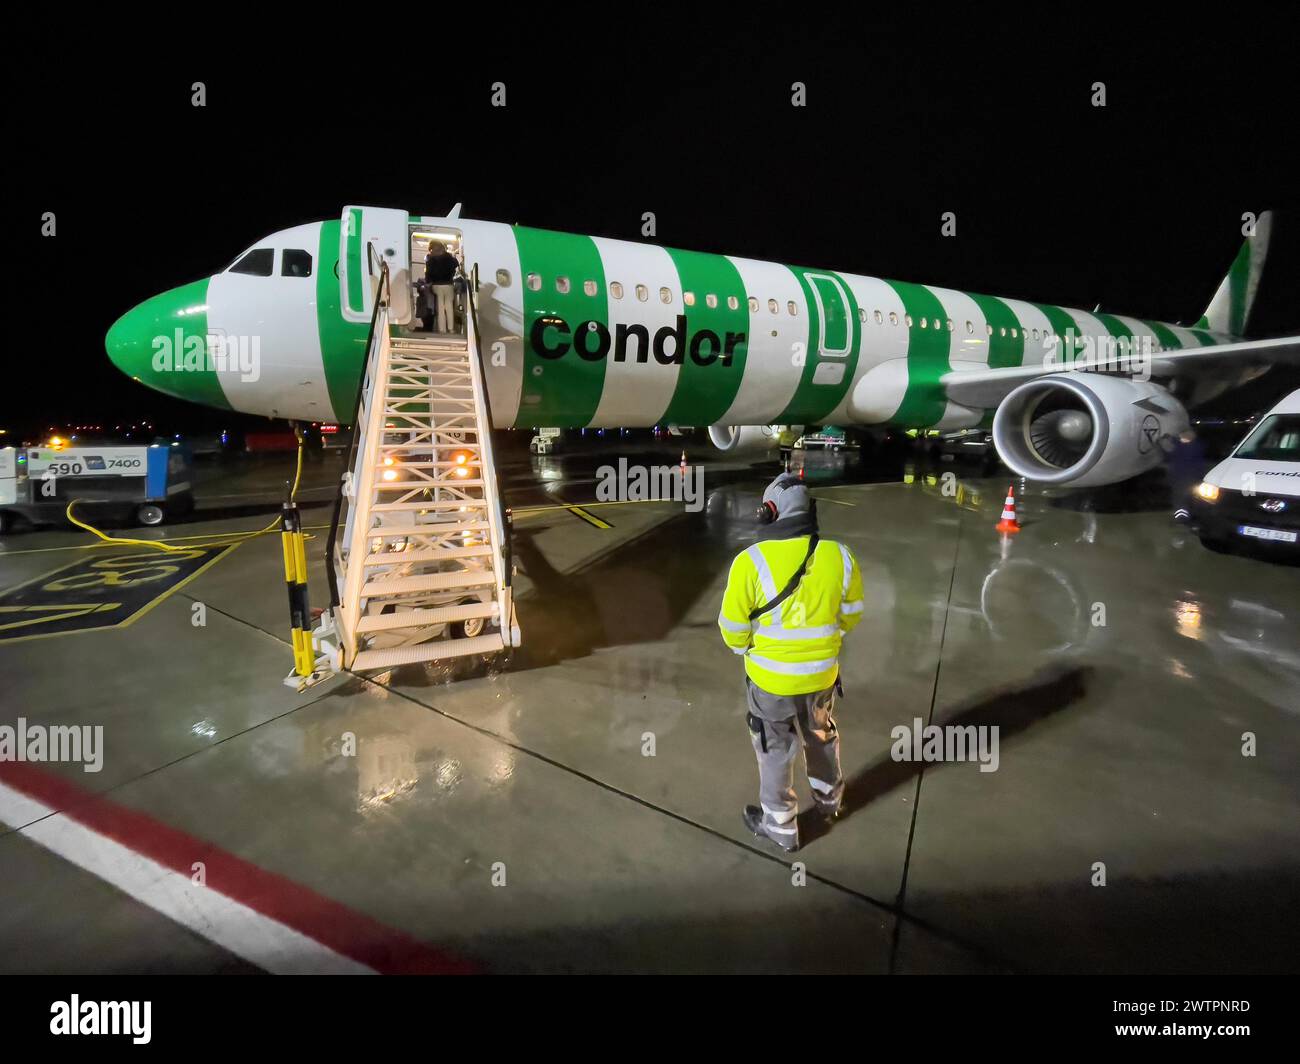 Night shot of Condor aircraft plane Airbus A321 standing landed in parking position on apron apron of airport with mobile stairs for passengers Stock Photo